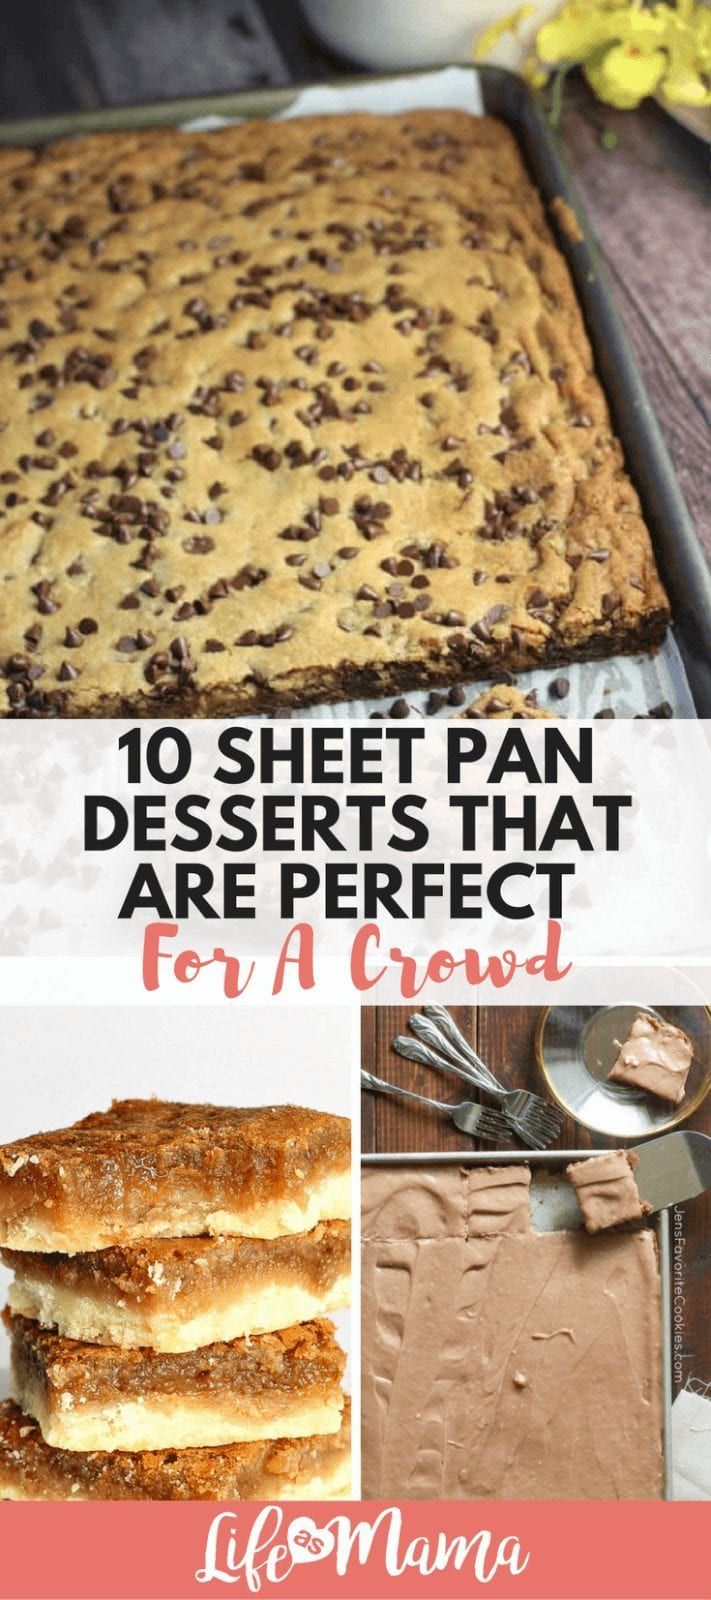 10 Sheet Pan Desserts That Are Perfect For A Crowd - Page 3 of 3 -   21 large desserts For A Crowd ideas